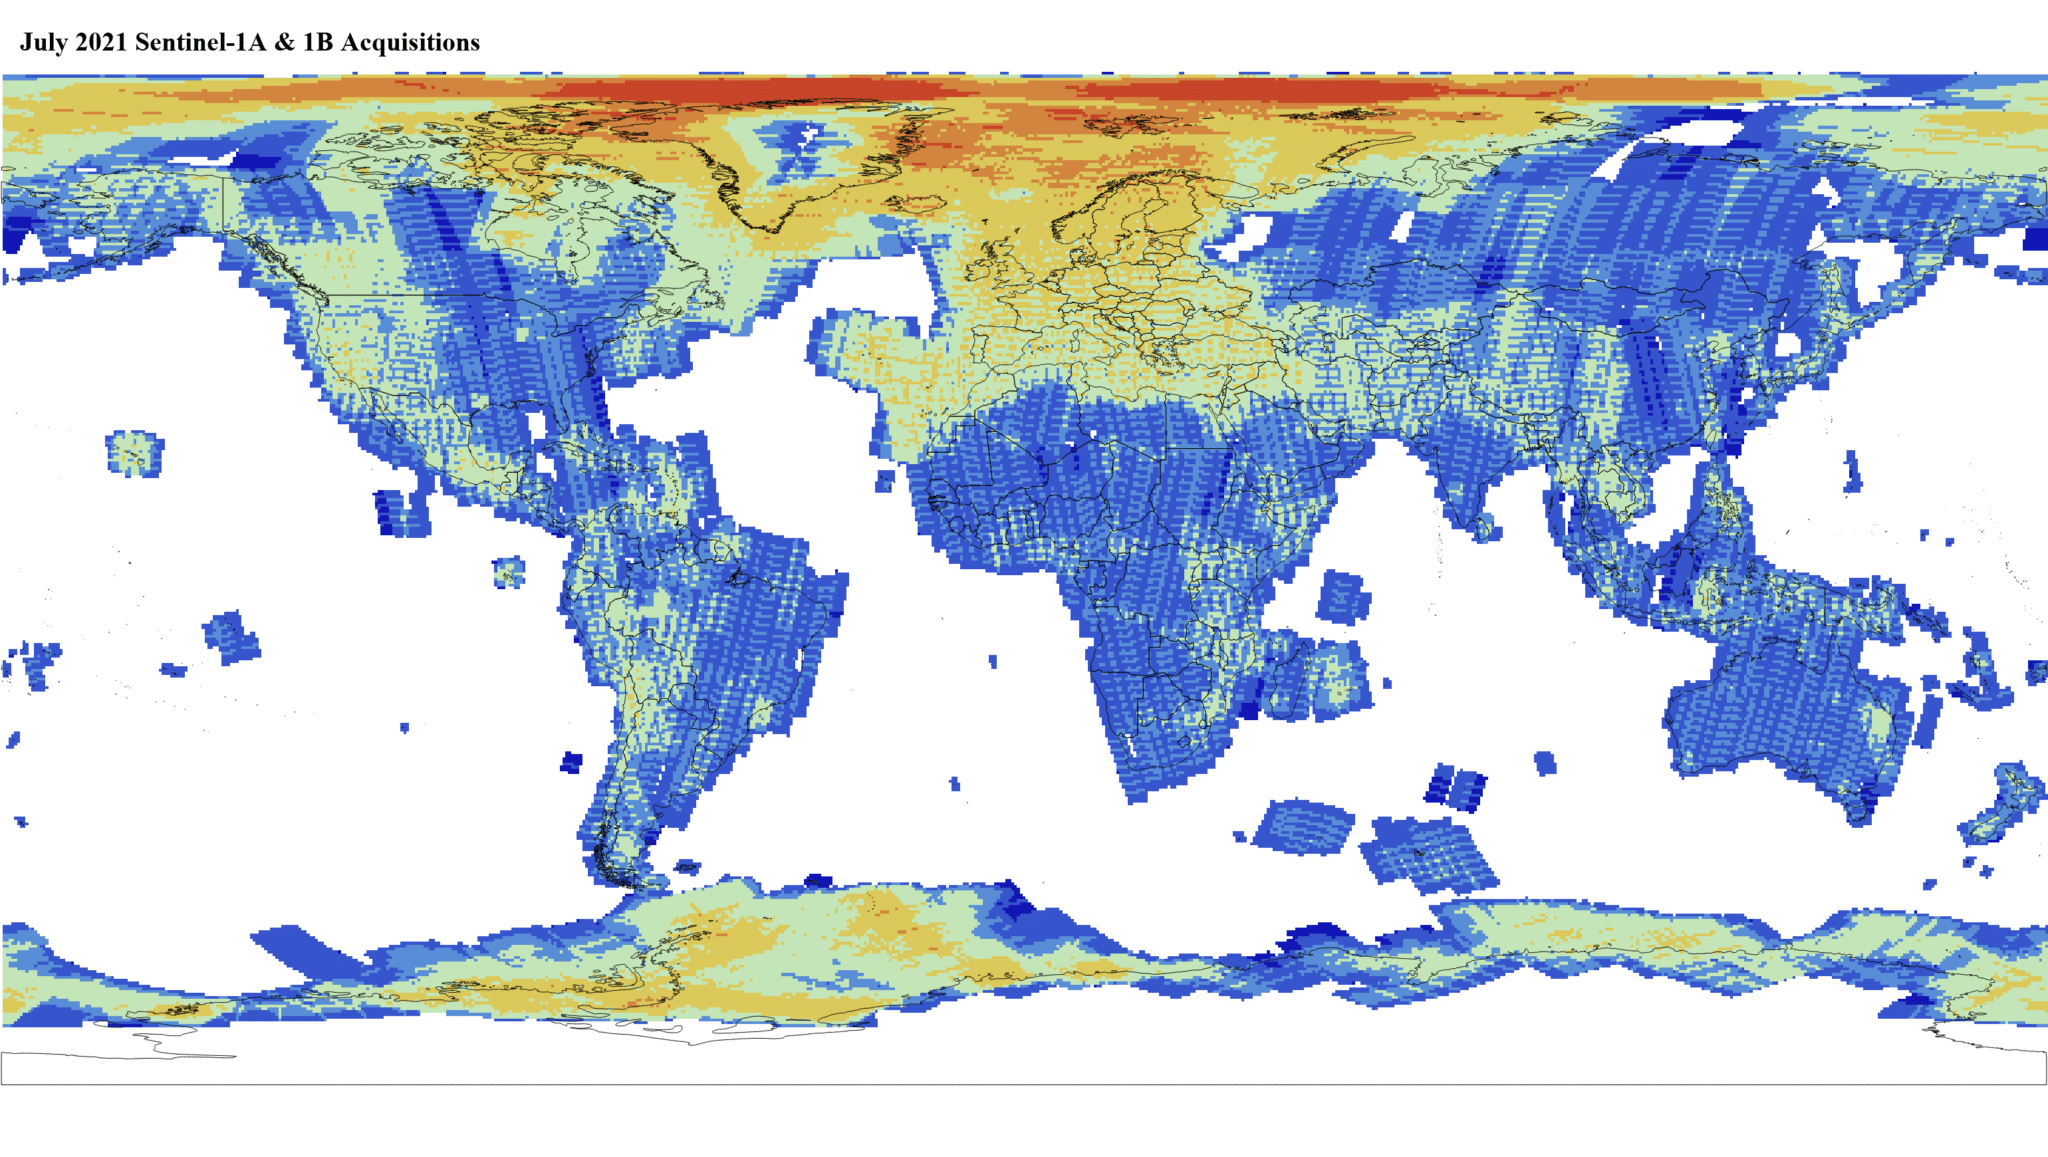 Heat map of Sentinel-1A and -1B GRD global acquisitions July 2021